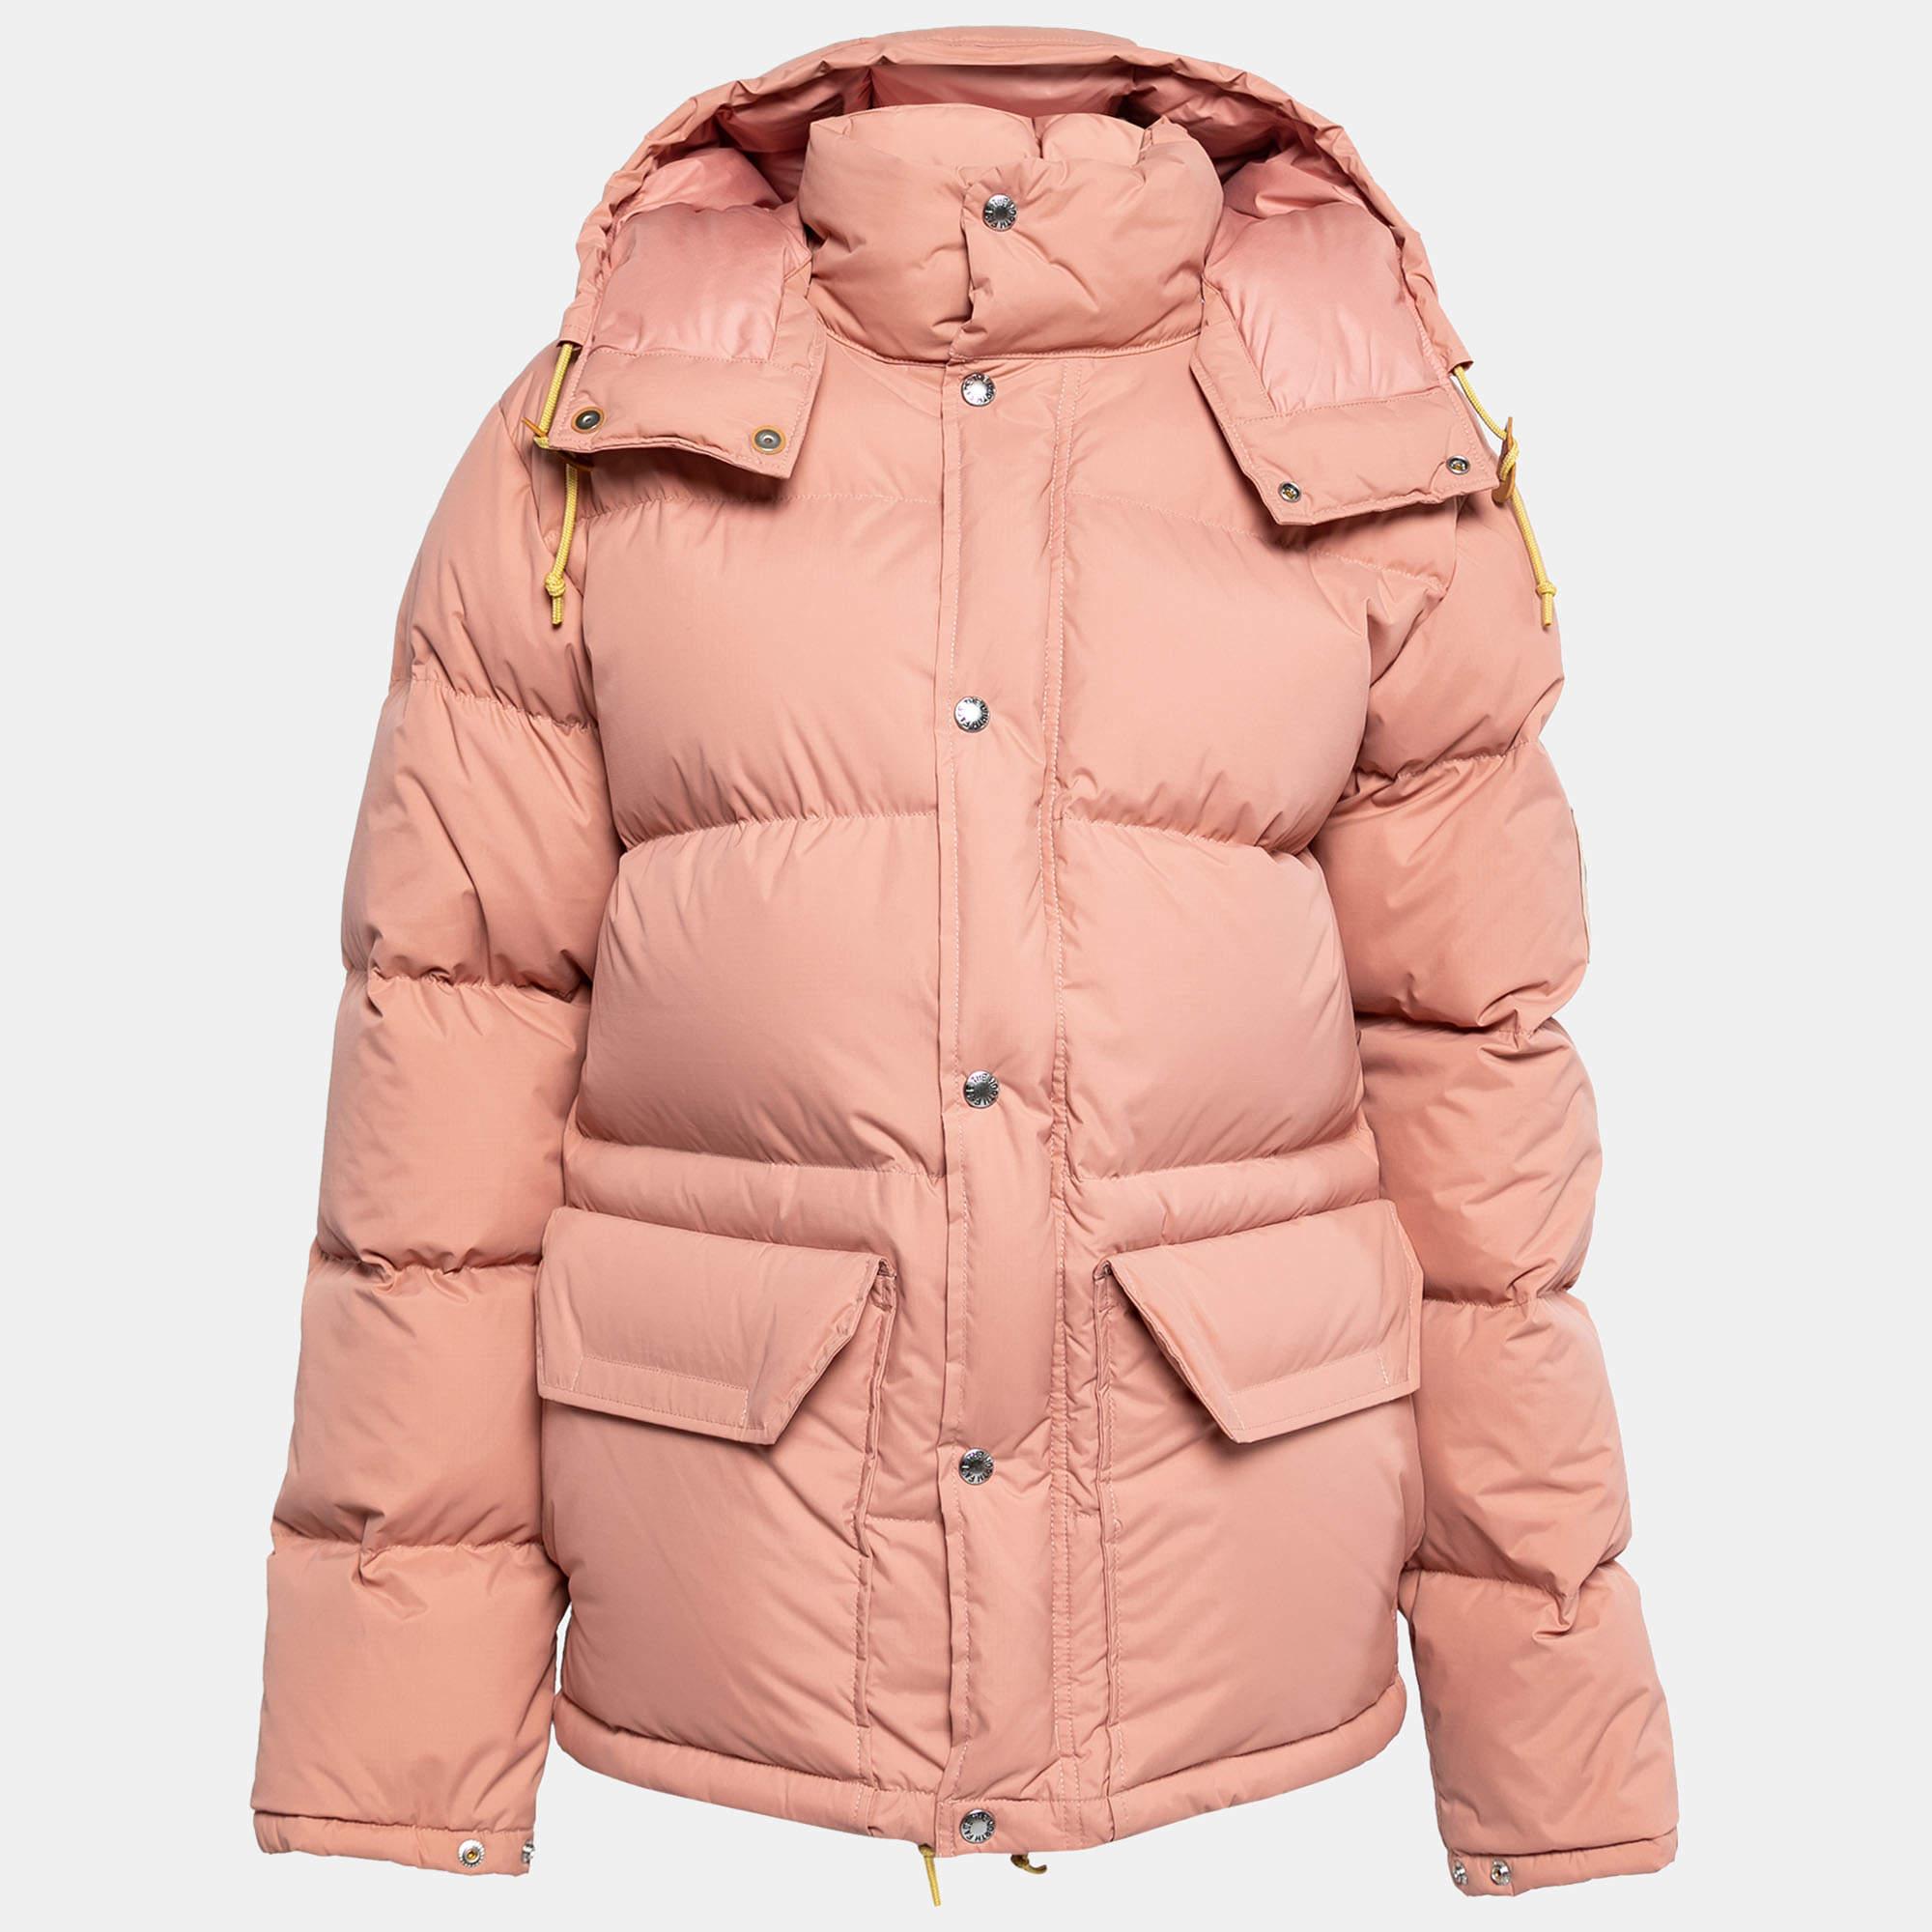 North Face X Gucci Light Pink Down Jacket S 1